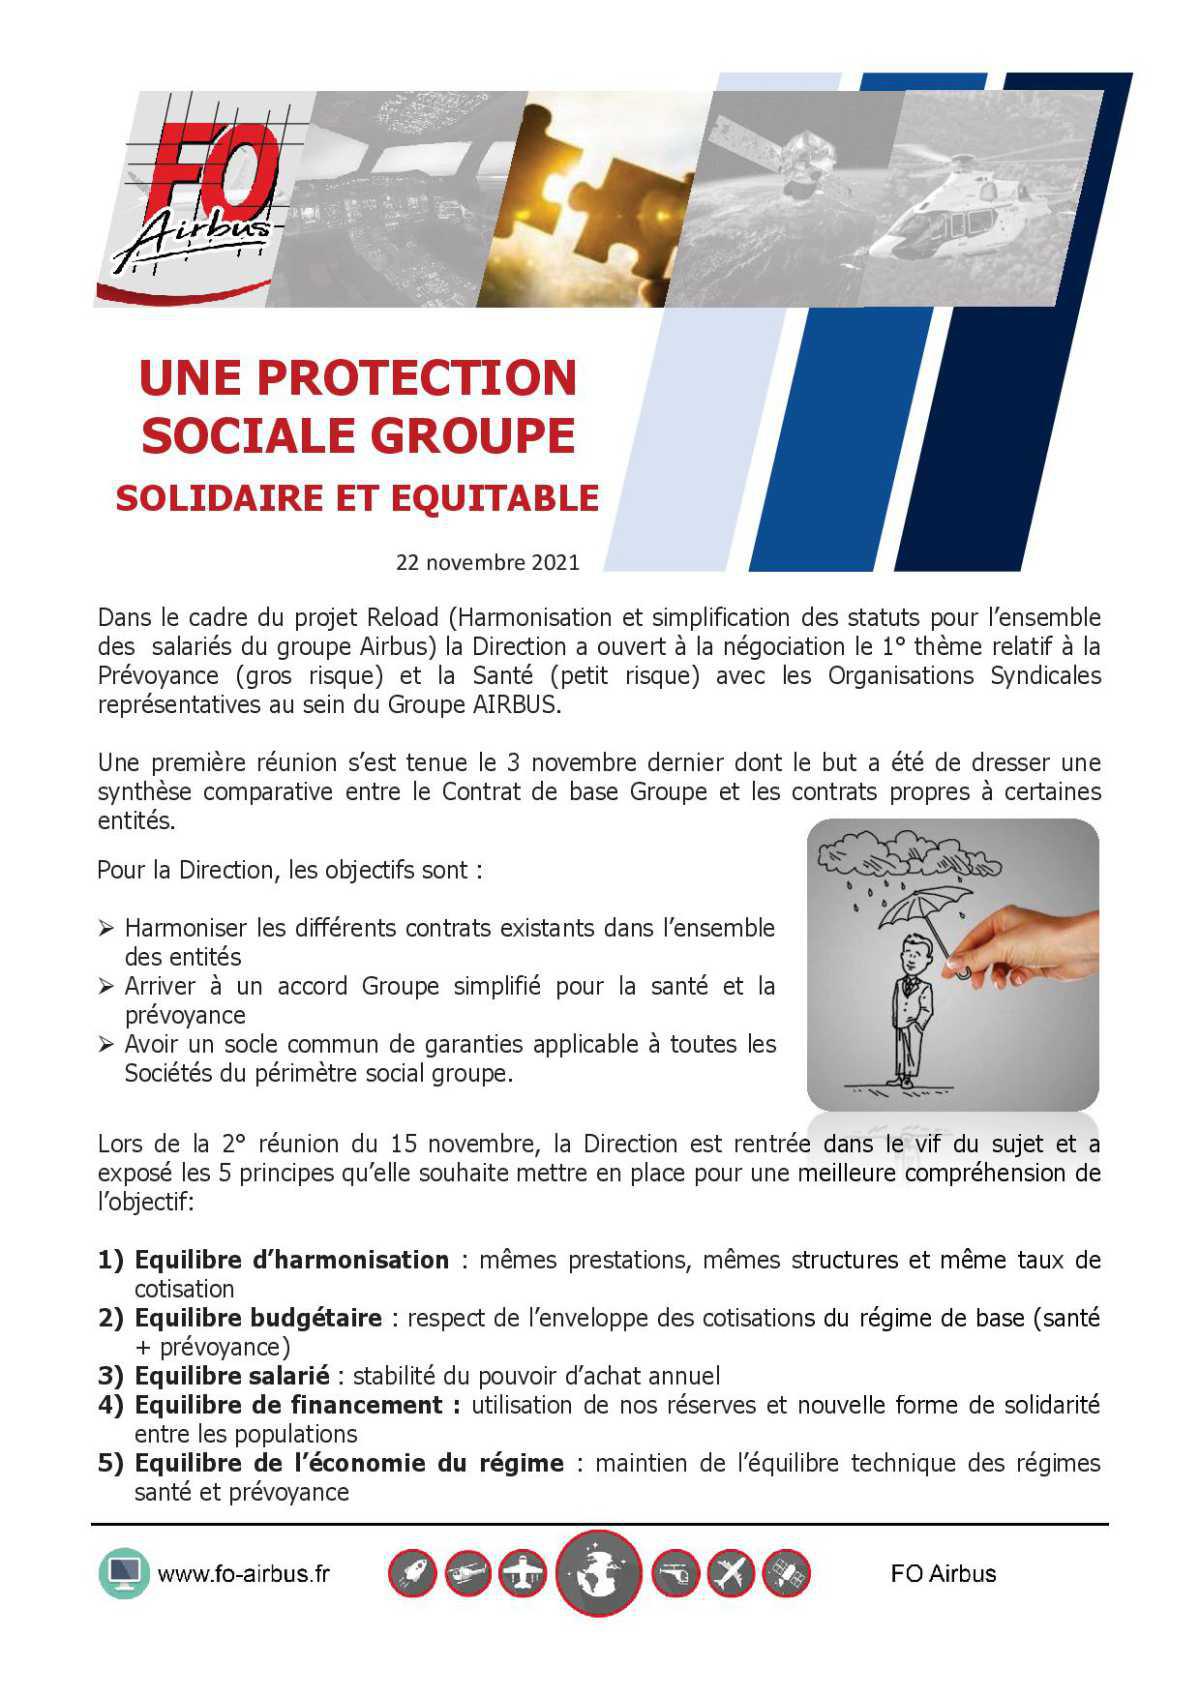 protection sociale